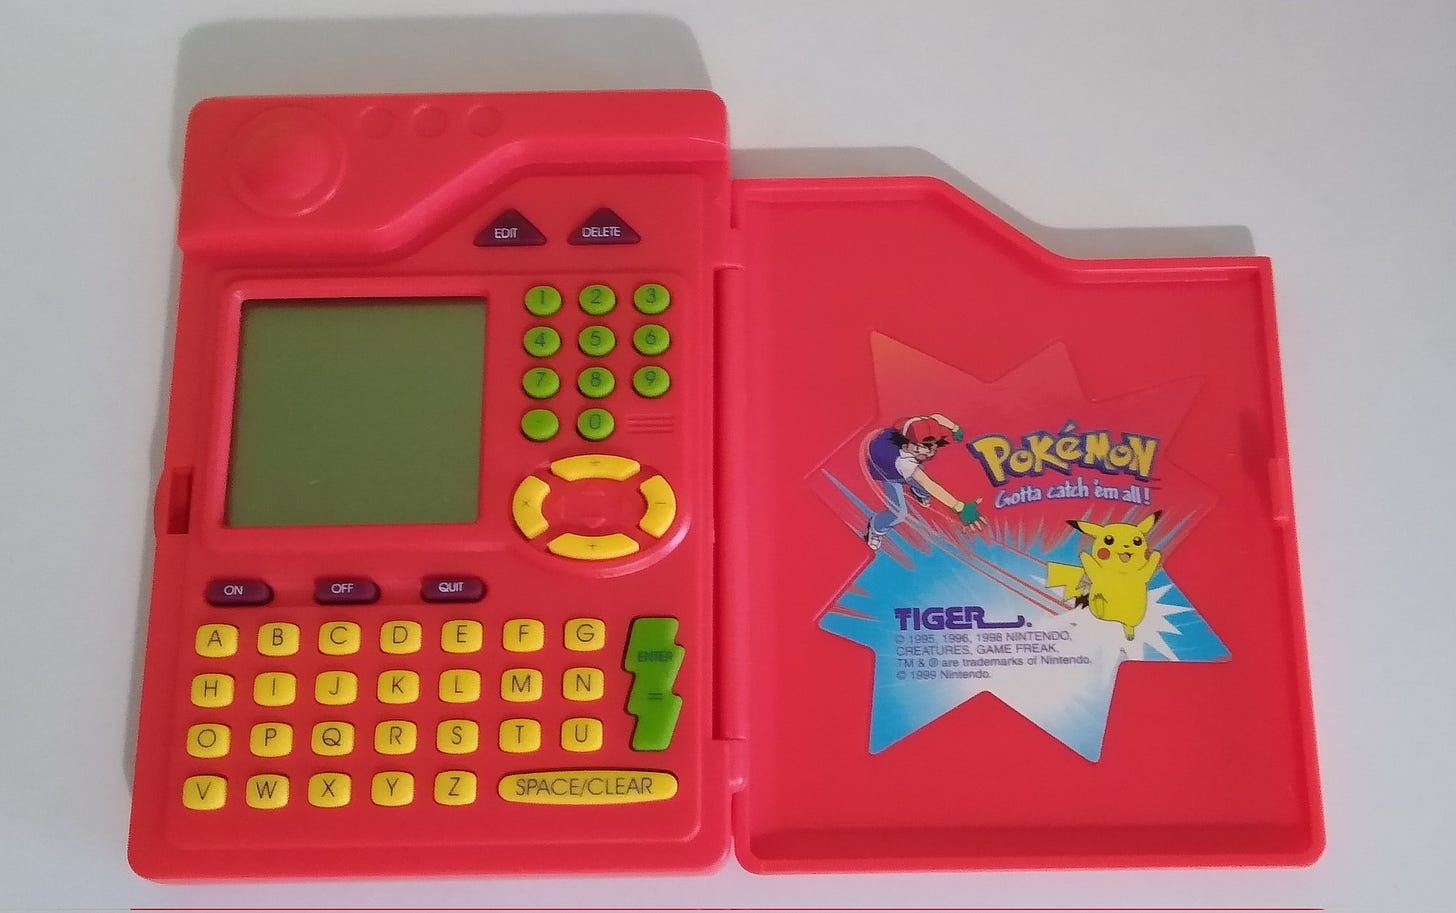 A picture of the Pokédex toy from my (Johto Times) personal collection, which is one of many electronic toys that Chris worked on